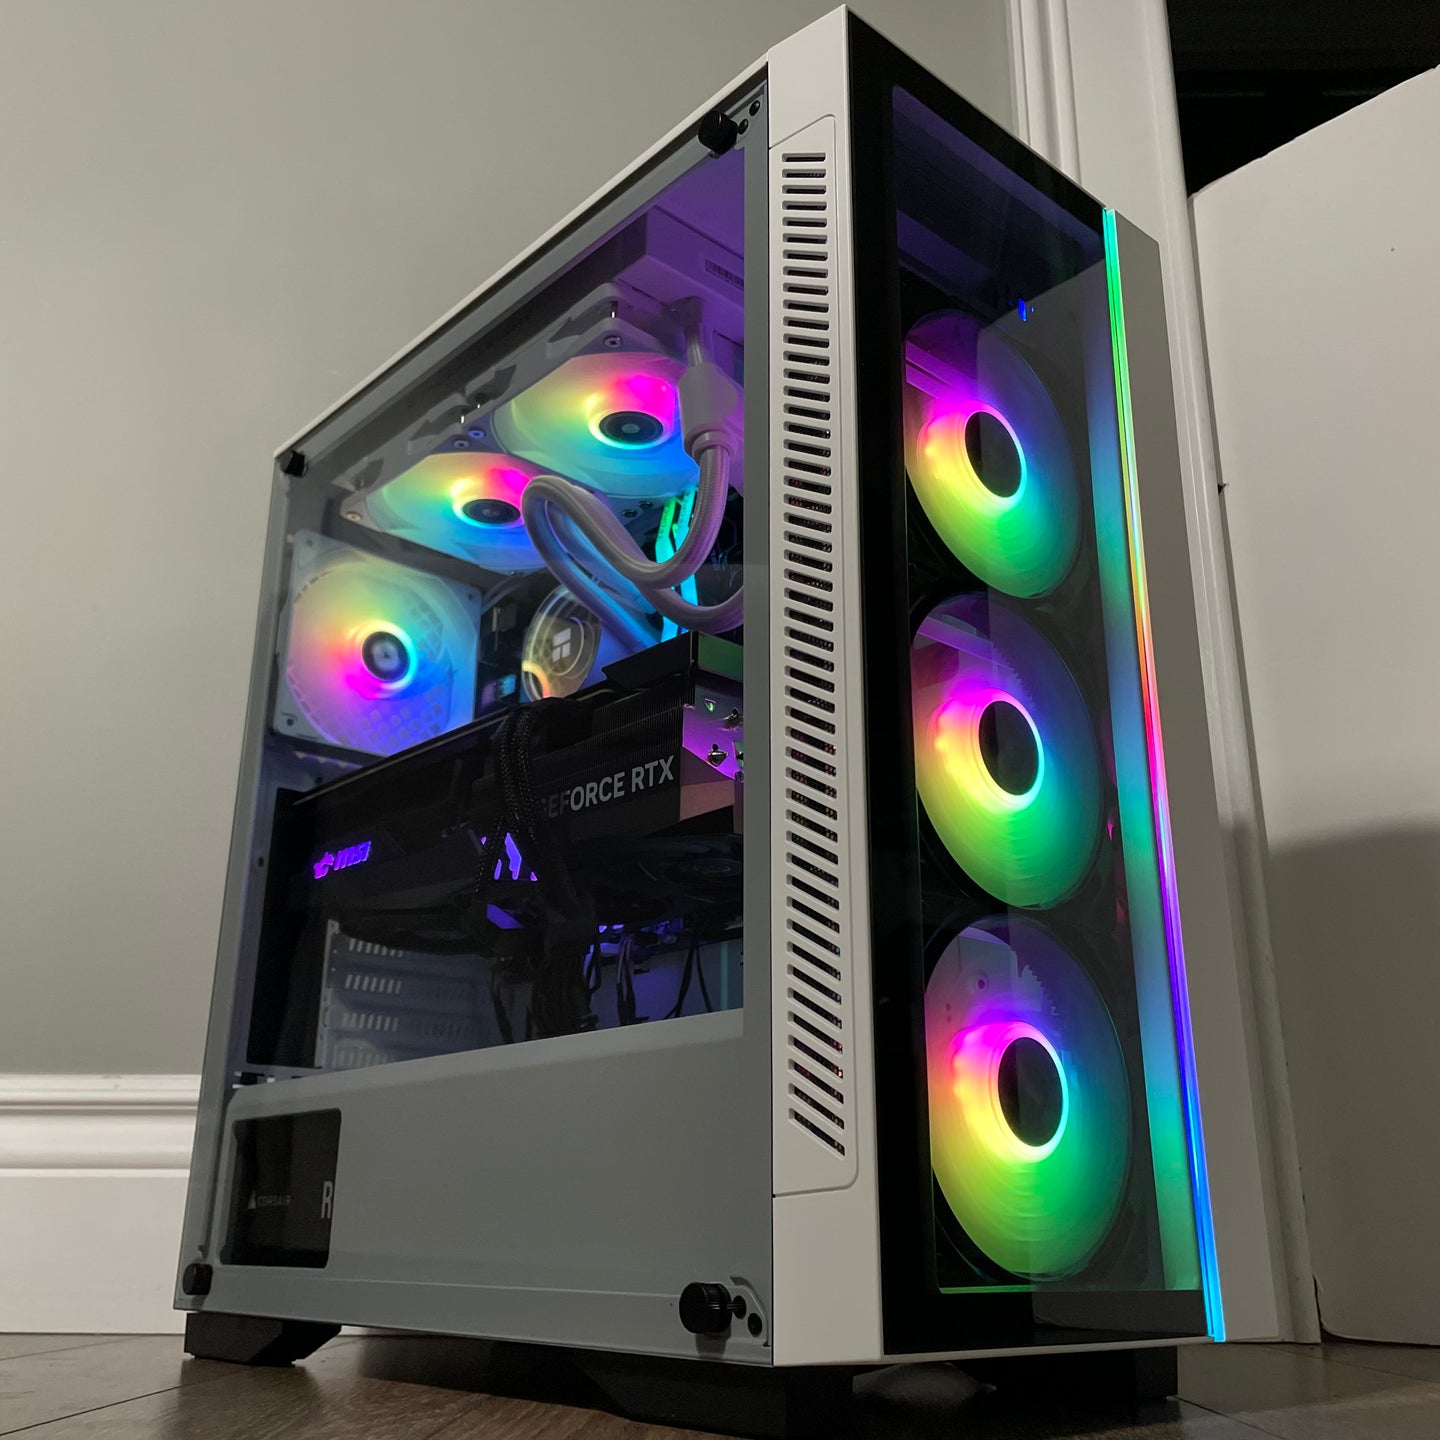 Brand New 8-Core High-End Gaming PC, Ryzen 7 7700x (Better Than i9-12900K), RTX 4090 24GB, 32GB 6000mhz DDR5 Ram, 2TB NVME SSD, 8TB HDD Options